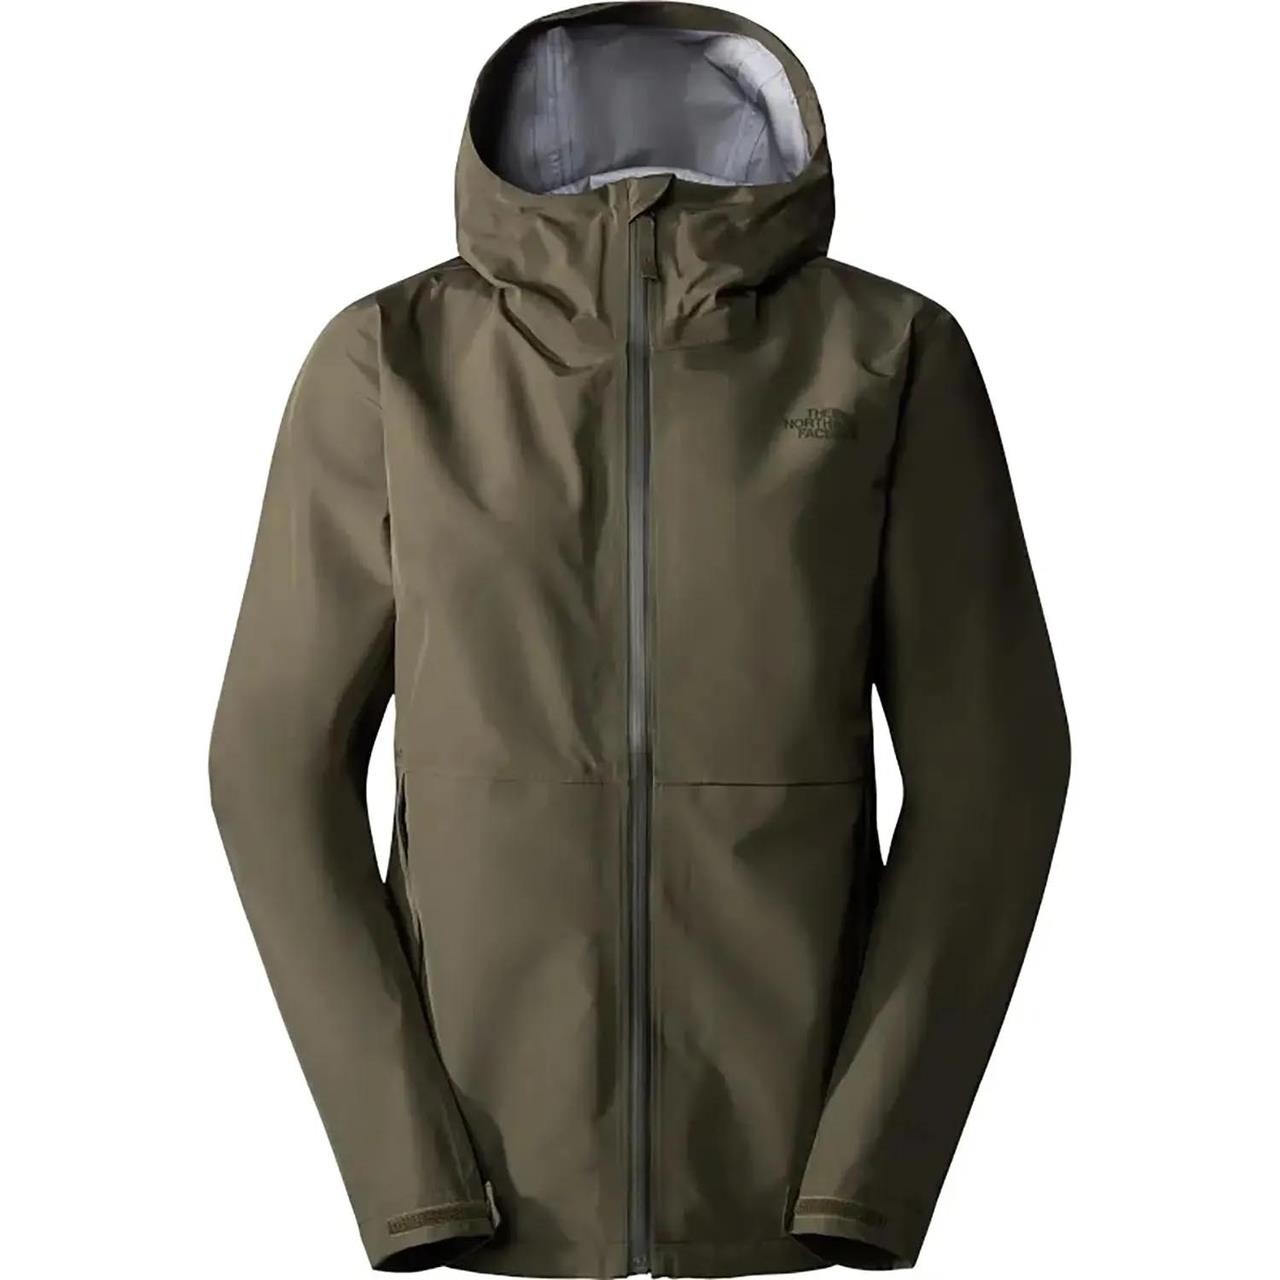 Se The North Face Womens Dryzzle Futurelight Jacket (Grøn (NEW TAUPE GREEN) Small) hos Friluftsland.dk